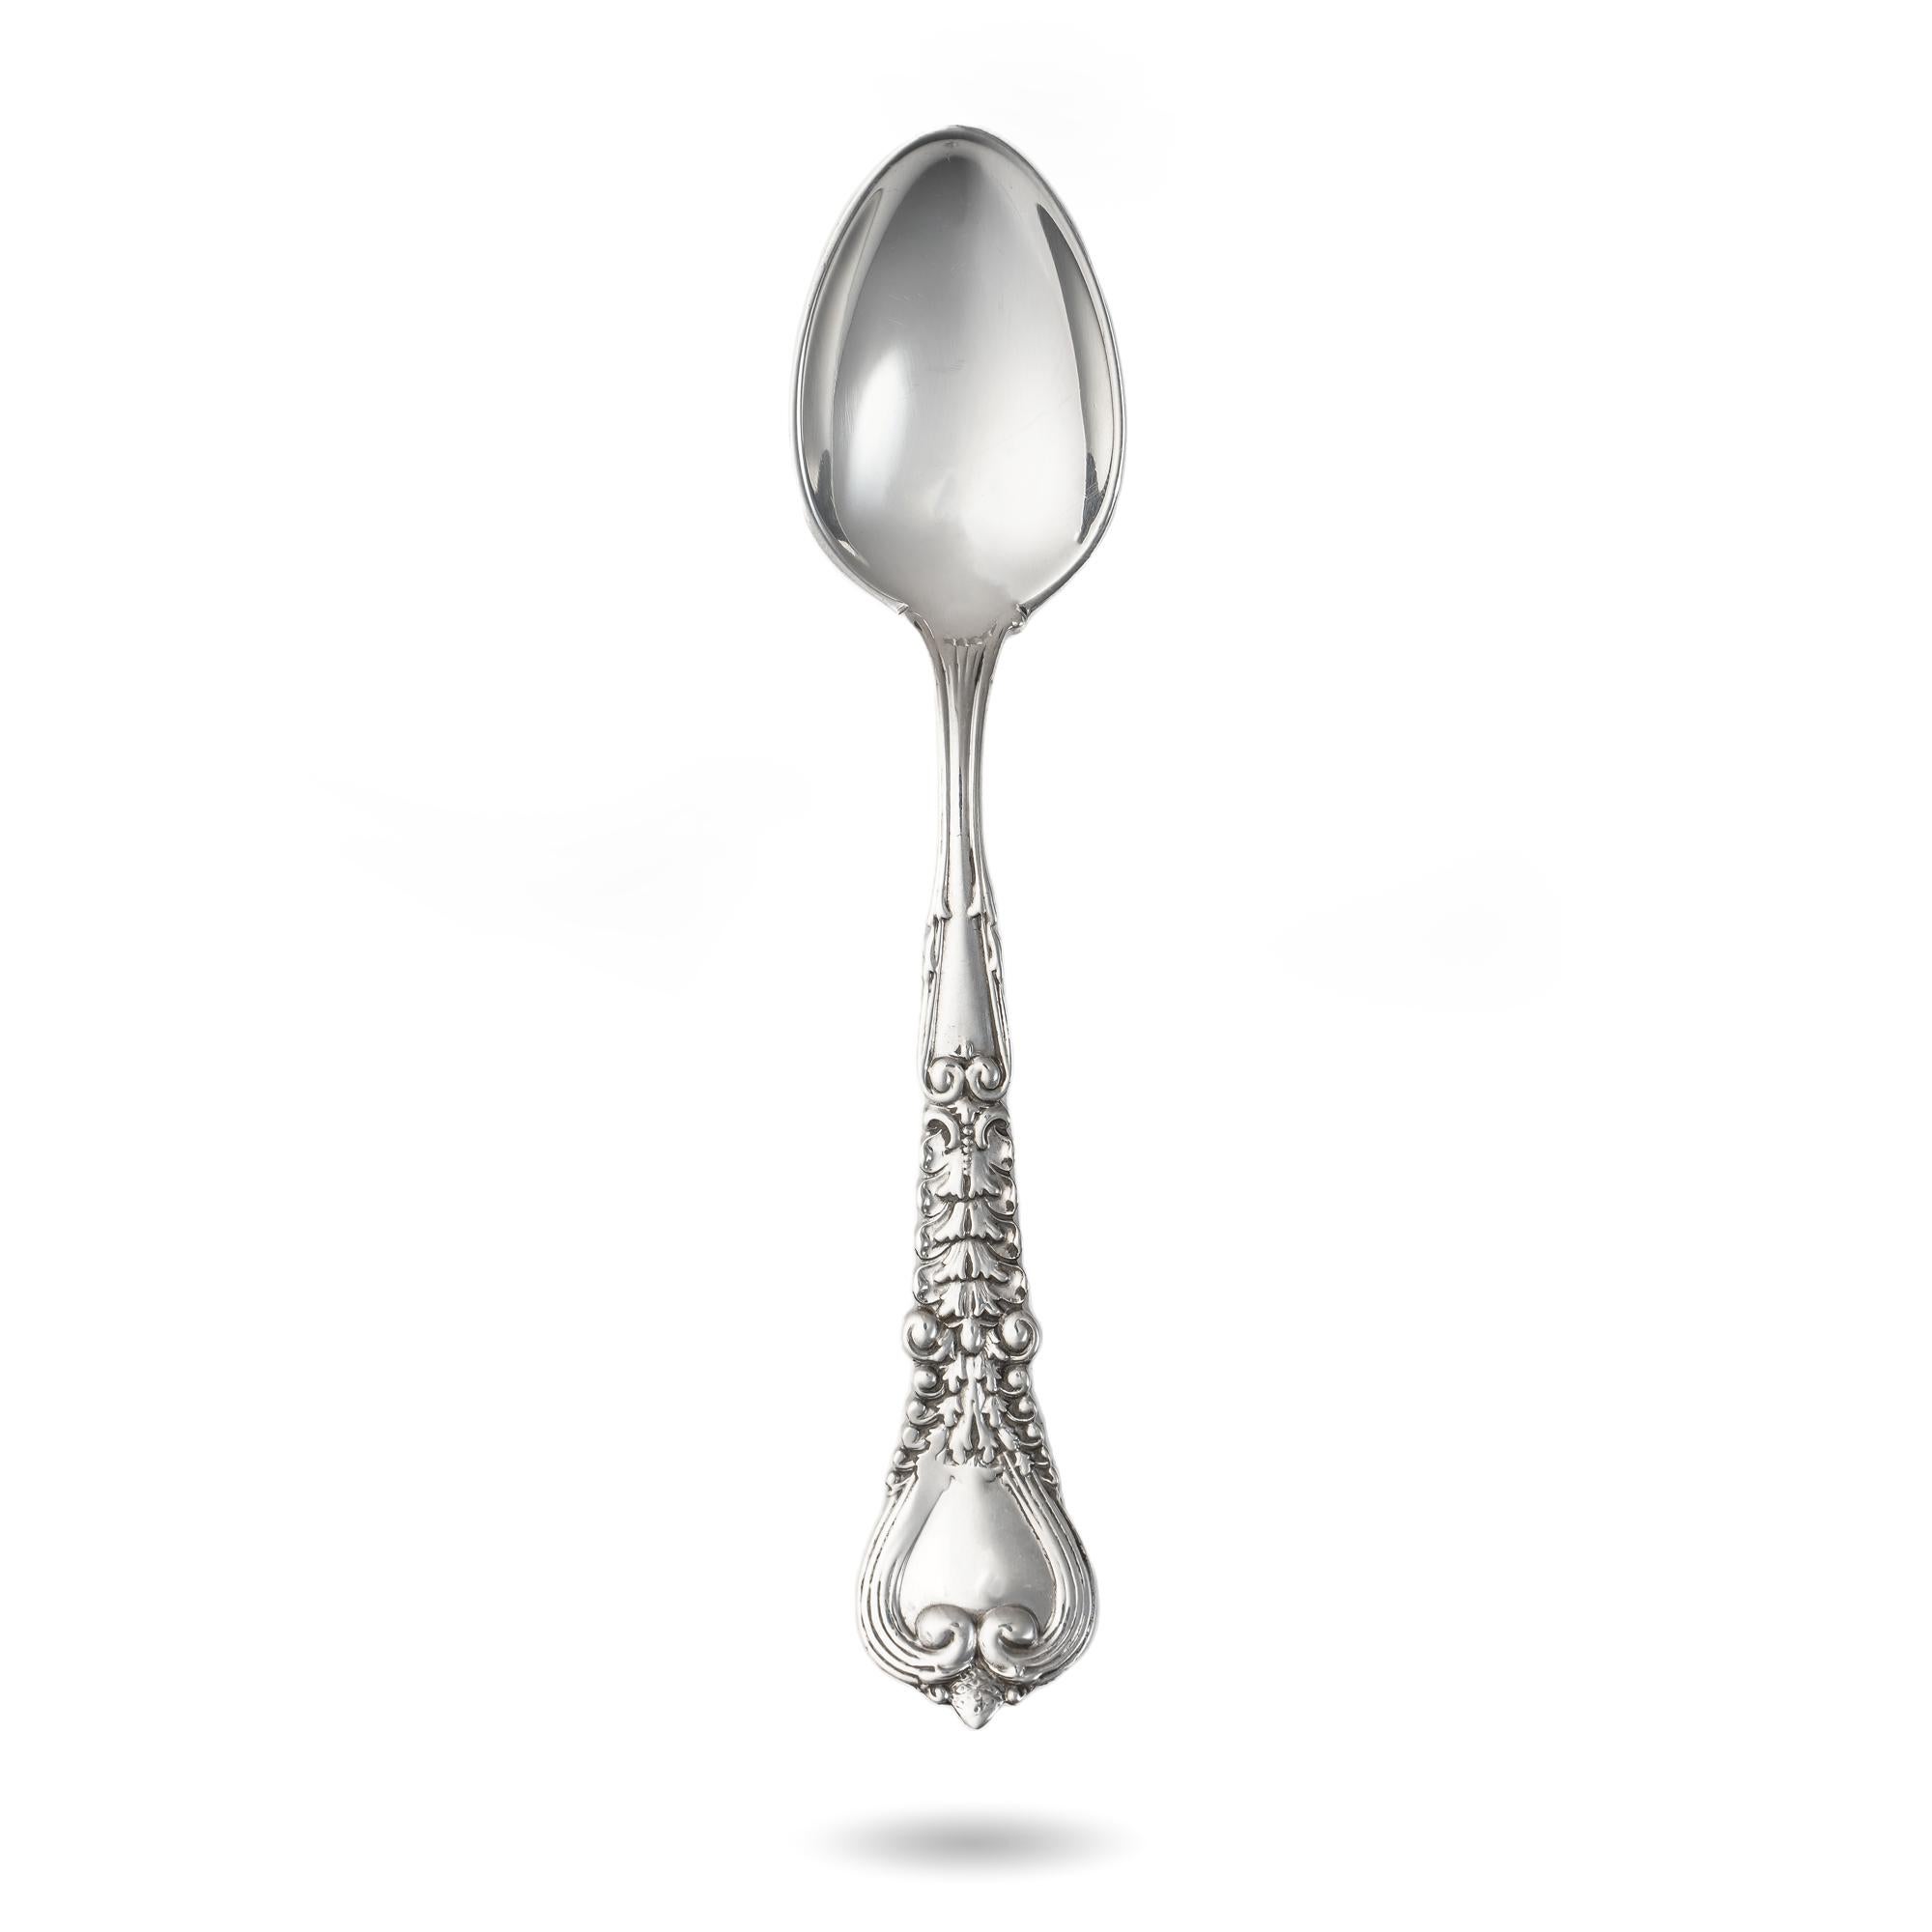 Antique Tiffany & Co. sterling silver Florentine pattern demitasse spoon

Maker: Tiffany & Co
Pattern: Designed by Paulding Farnham
Style: Renaissance Revival
Introduced 1900, but the patent application not filed until May 9, 1904, issued June